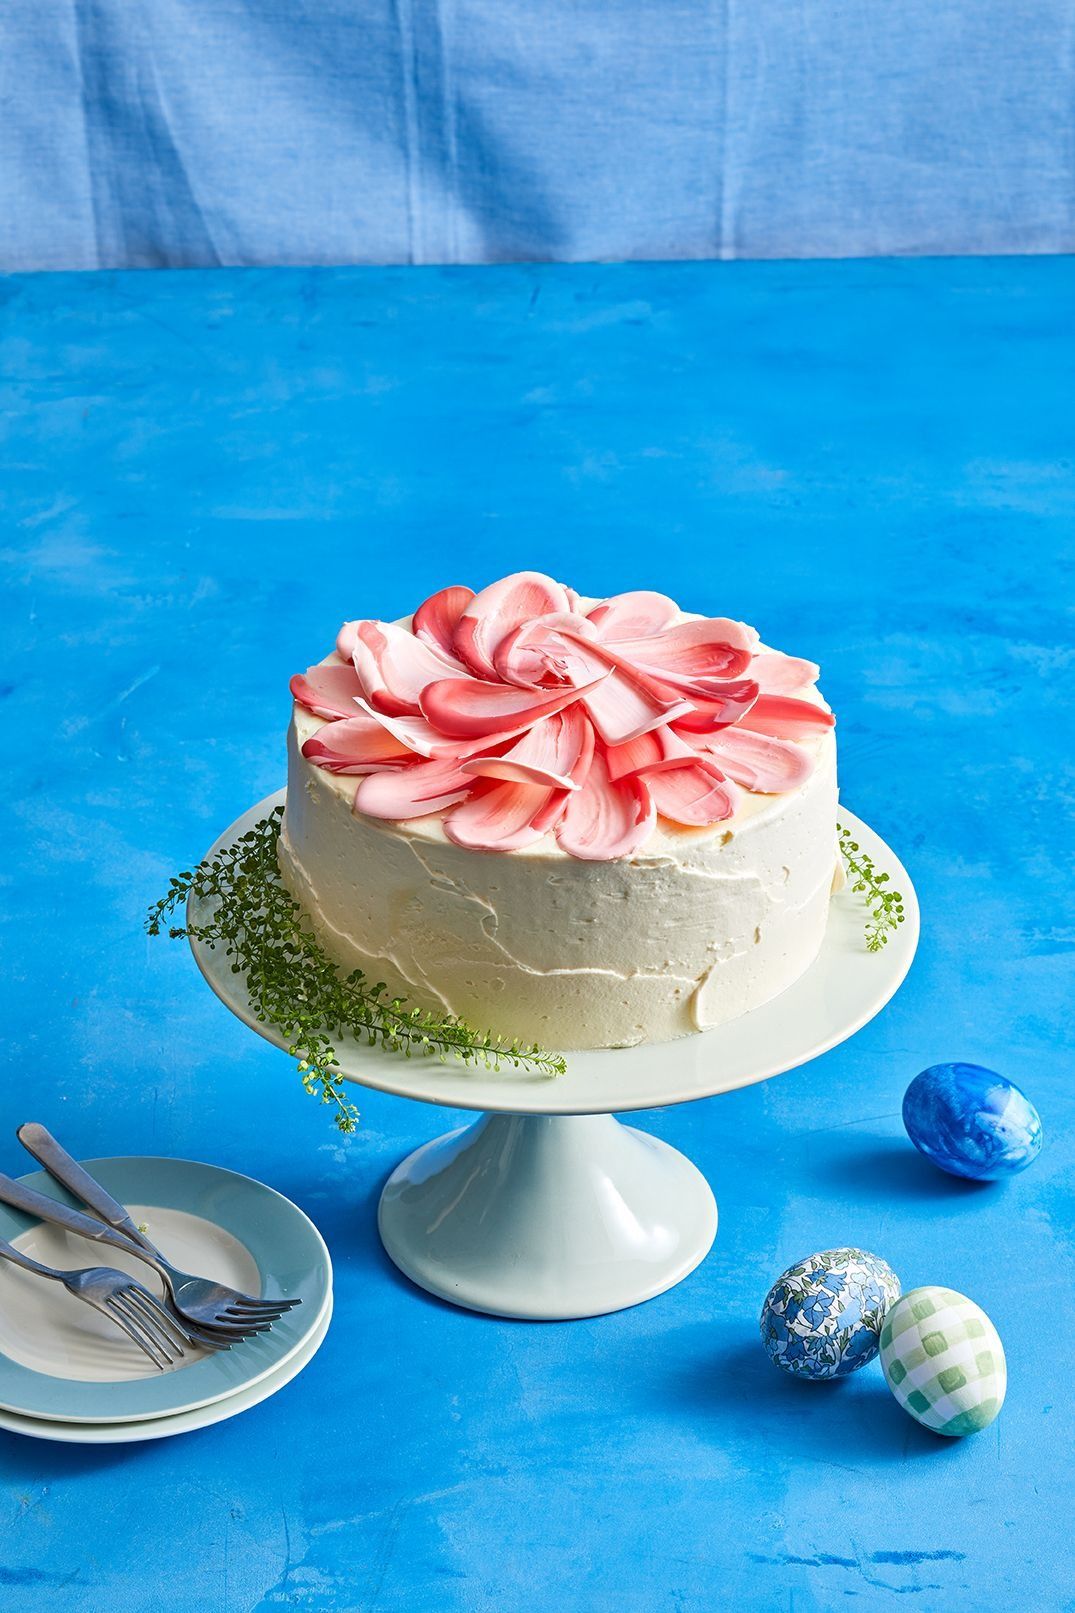 15 Pretty Cakes - Pictures of Beautiful Cakes - Delish.com